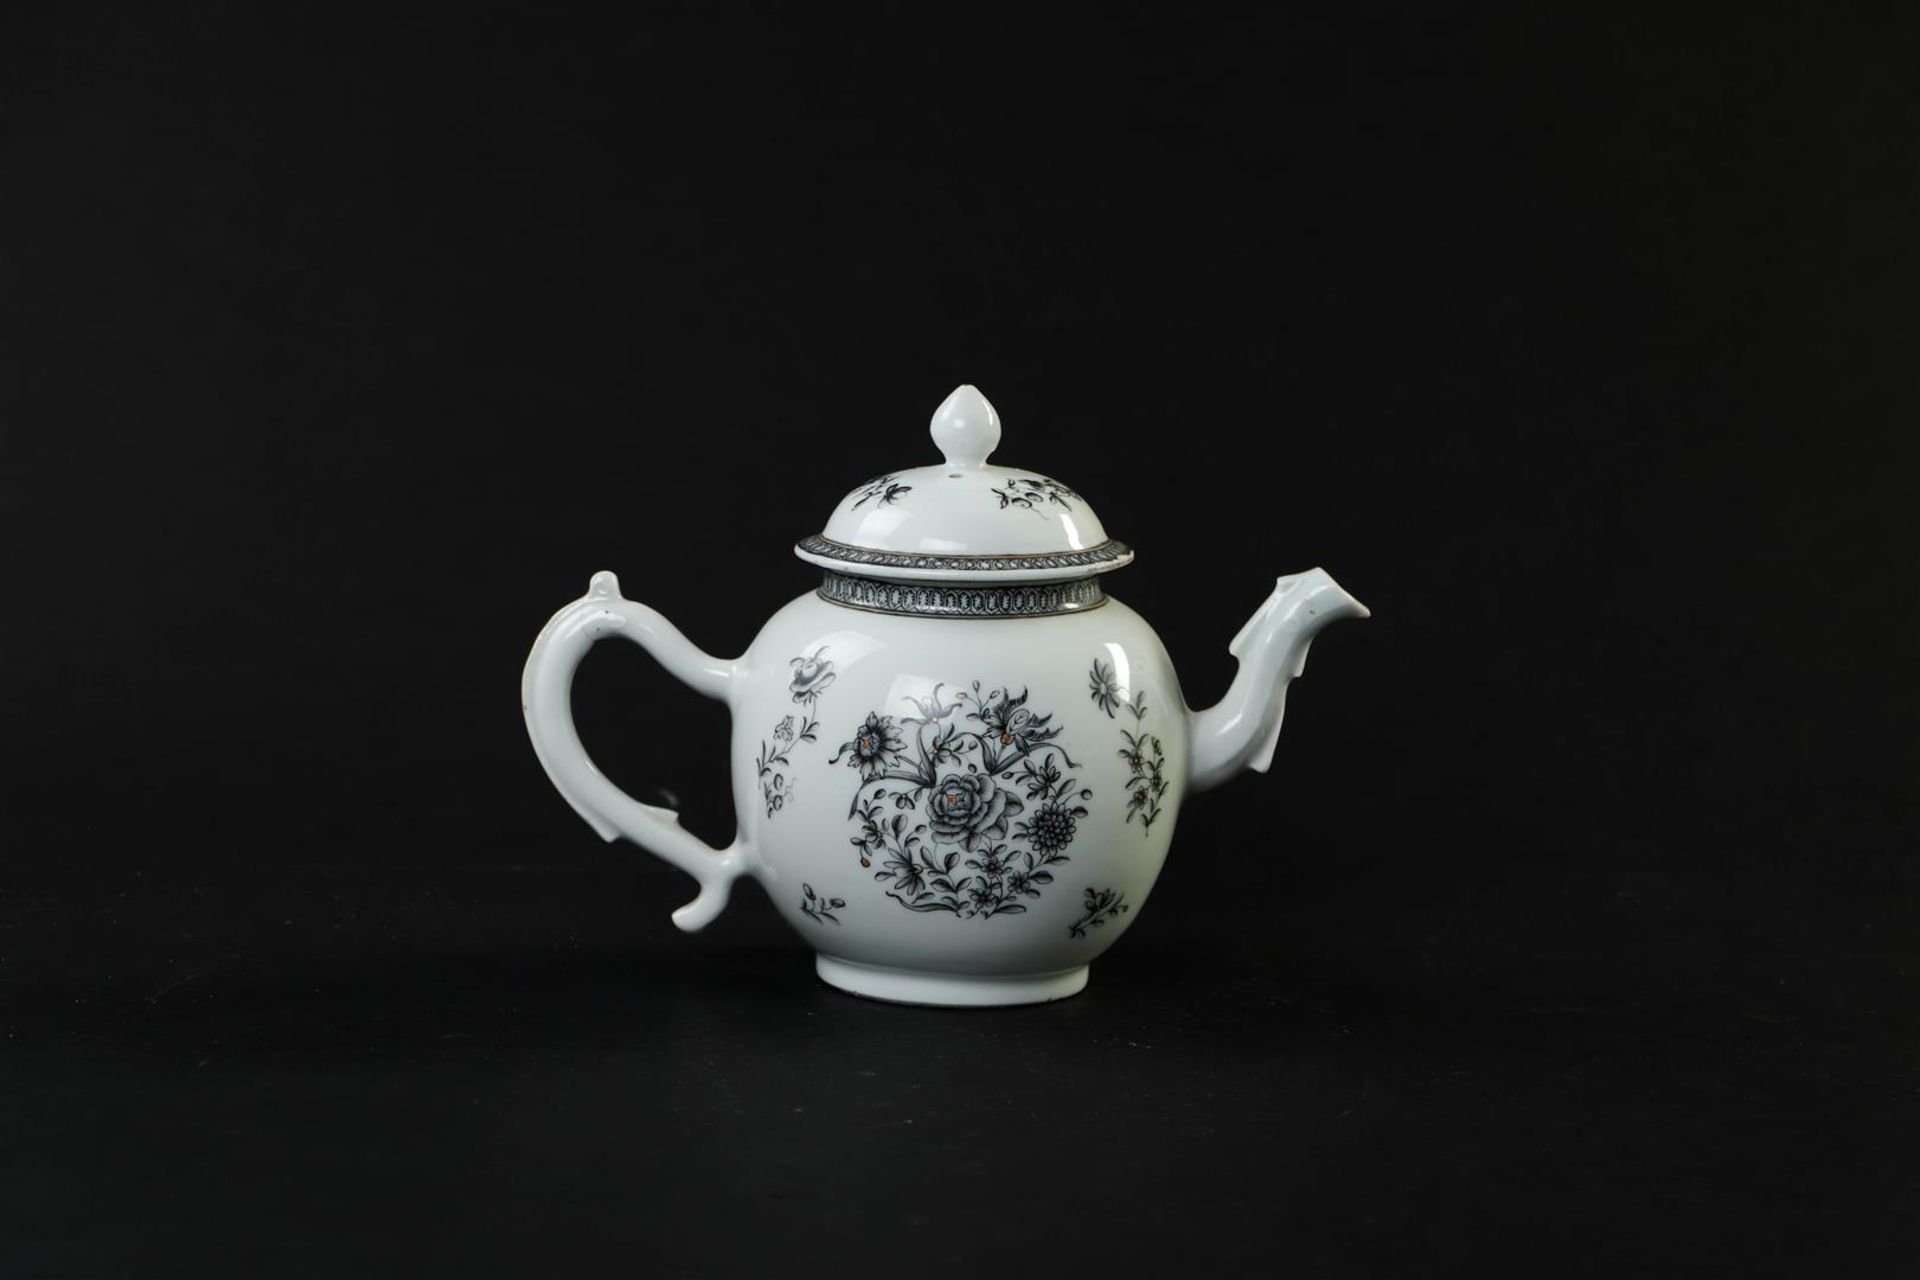 An Encre de Chine tableware set consisting of a teapot, milk jug, tea caddy, patty pan and spoon tra - Image 3 of 24